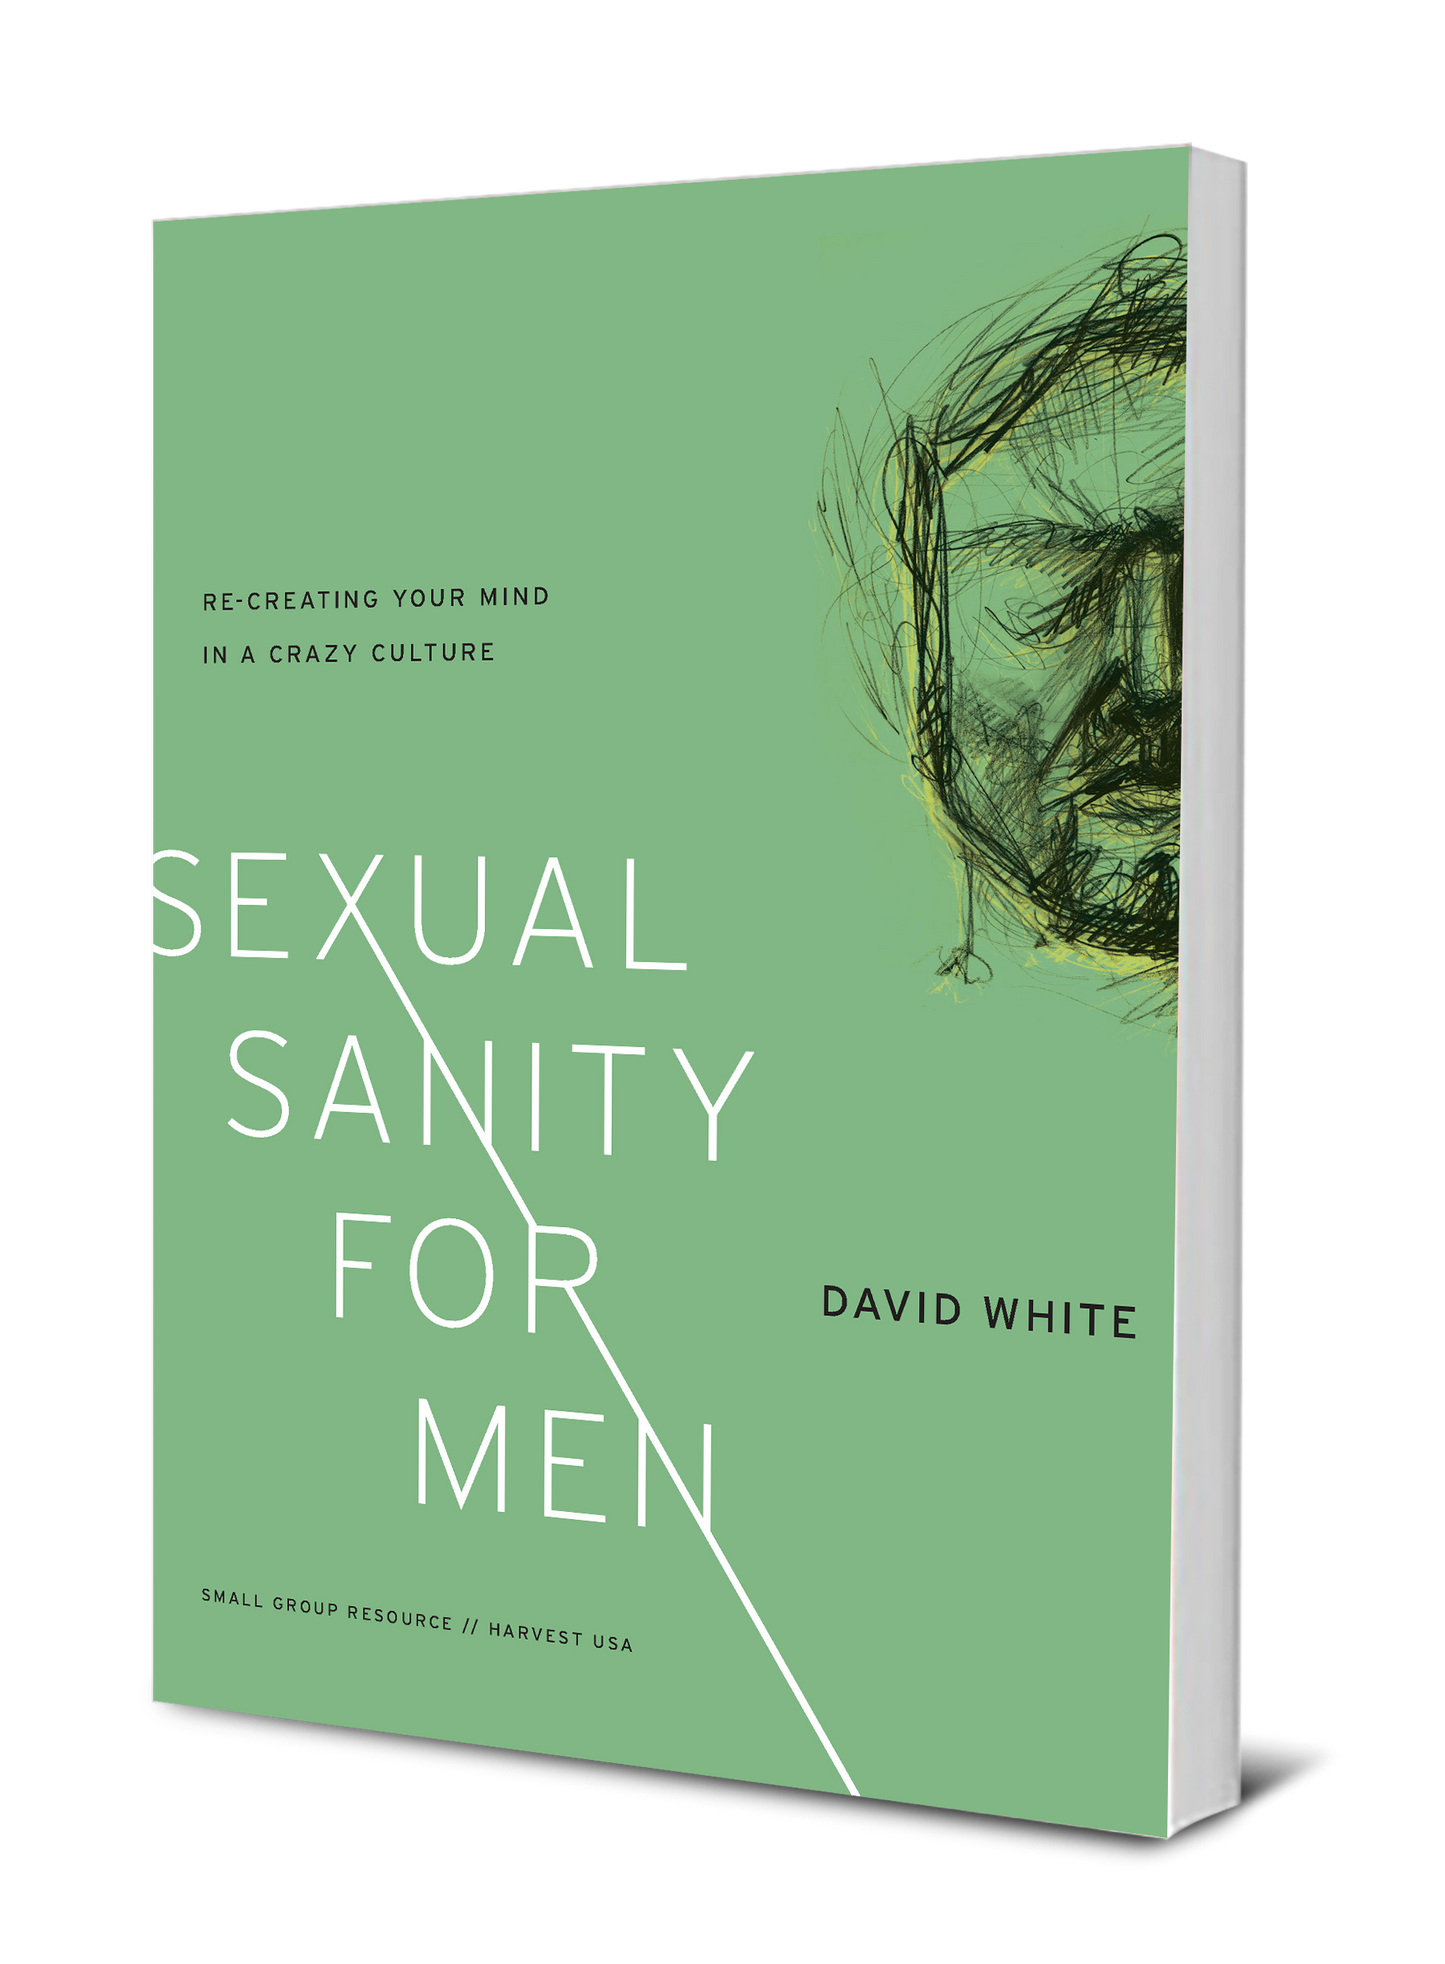 Sexual Sanity for Men: Re-Creating Your Mind in a Crazy Culture